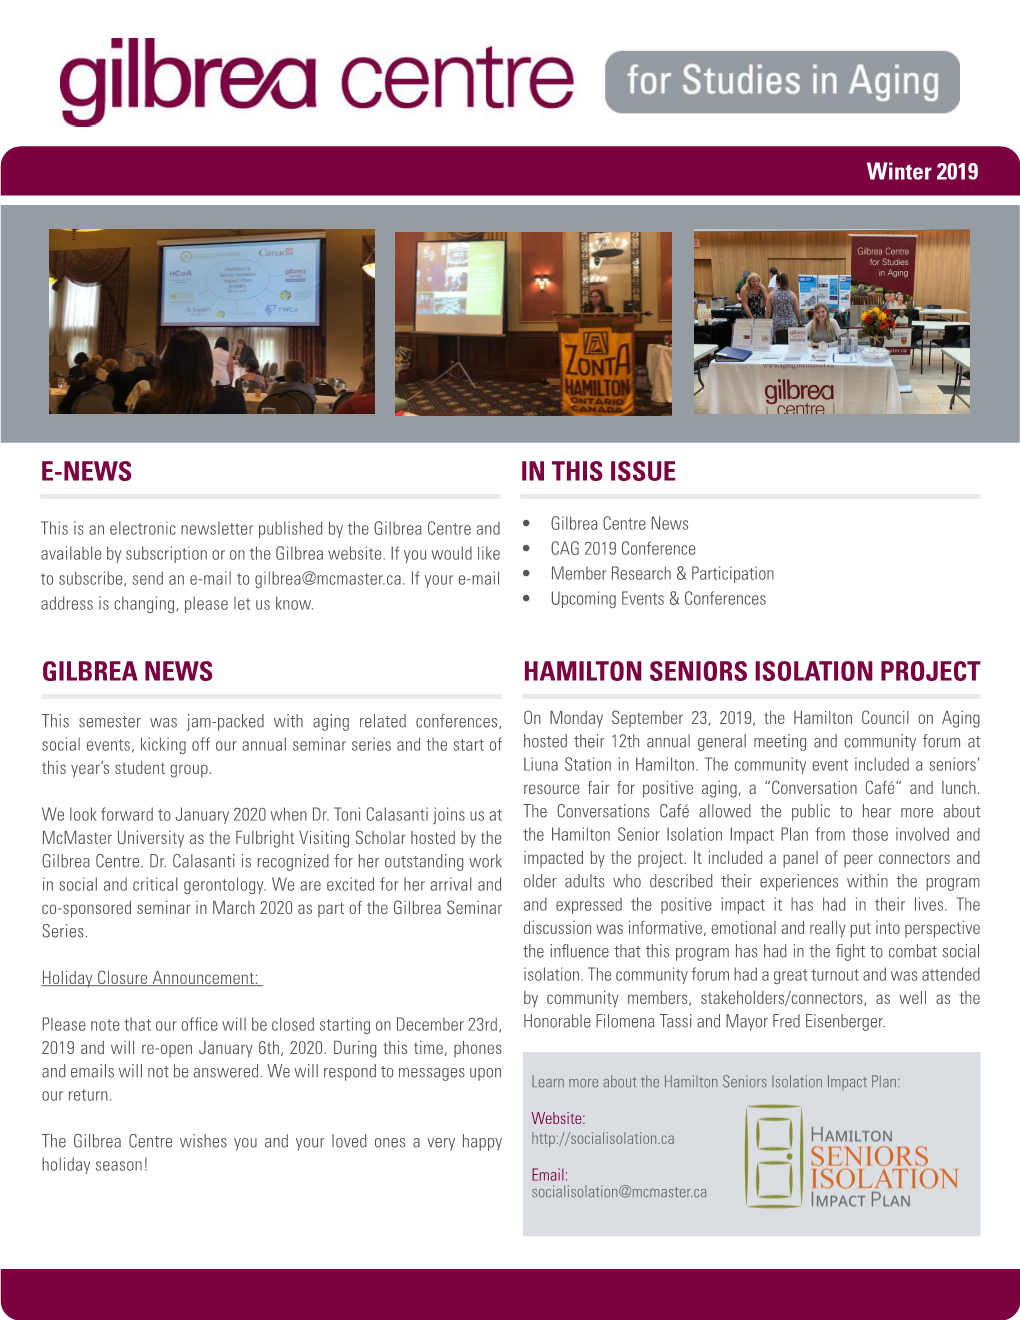 Gilbrea News E-News in This Issue Hamilton Seniors Isolation Project